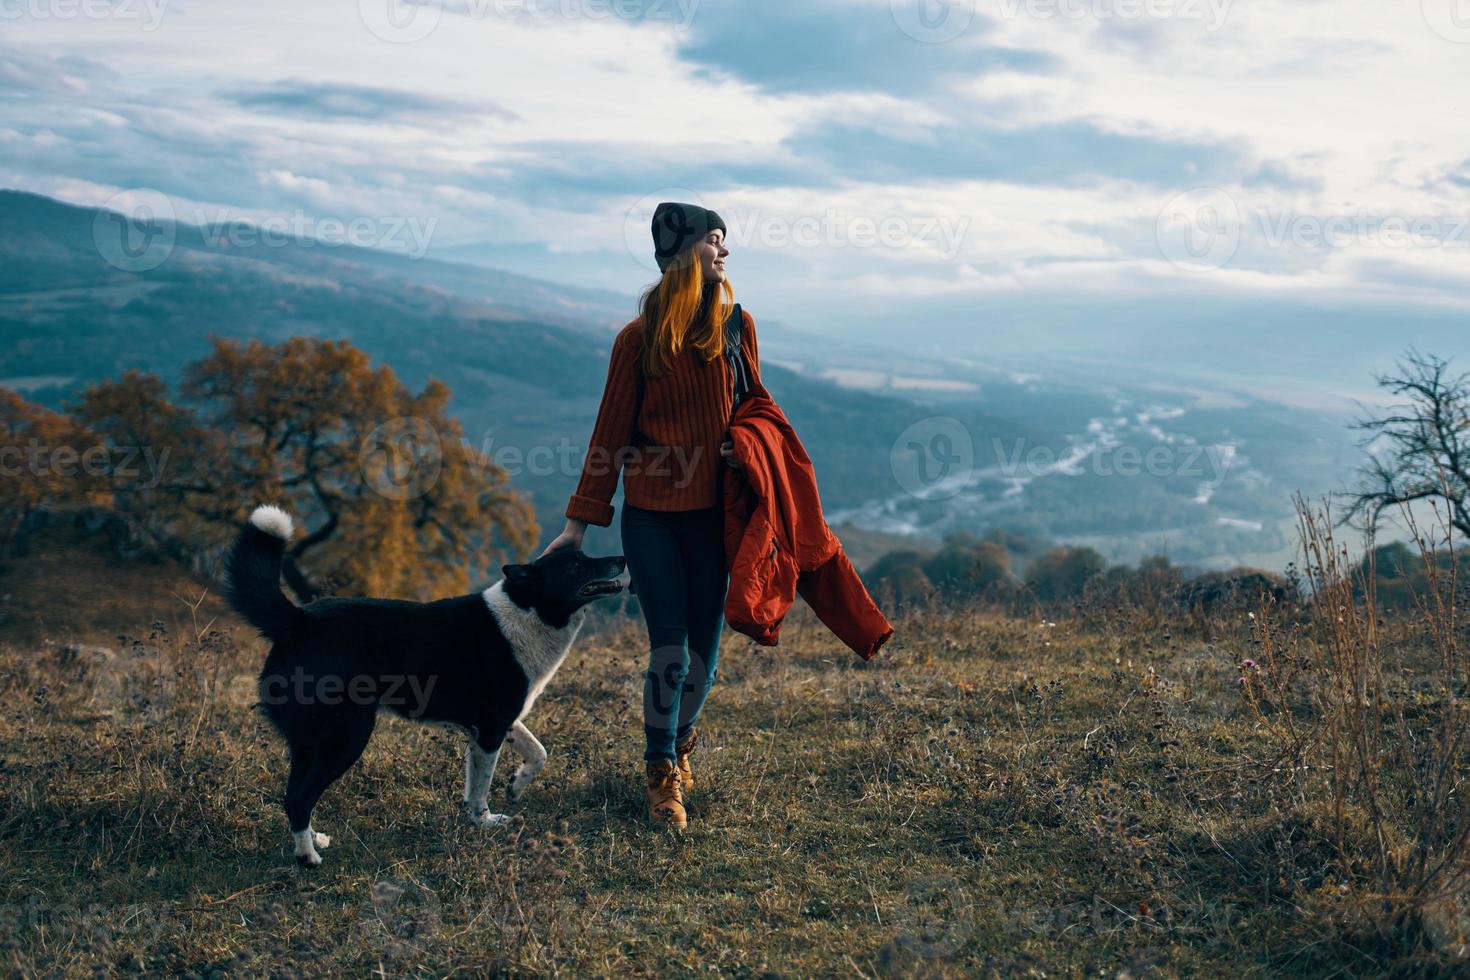 women walking next to the dog in nature landscape mountains travel photo